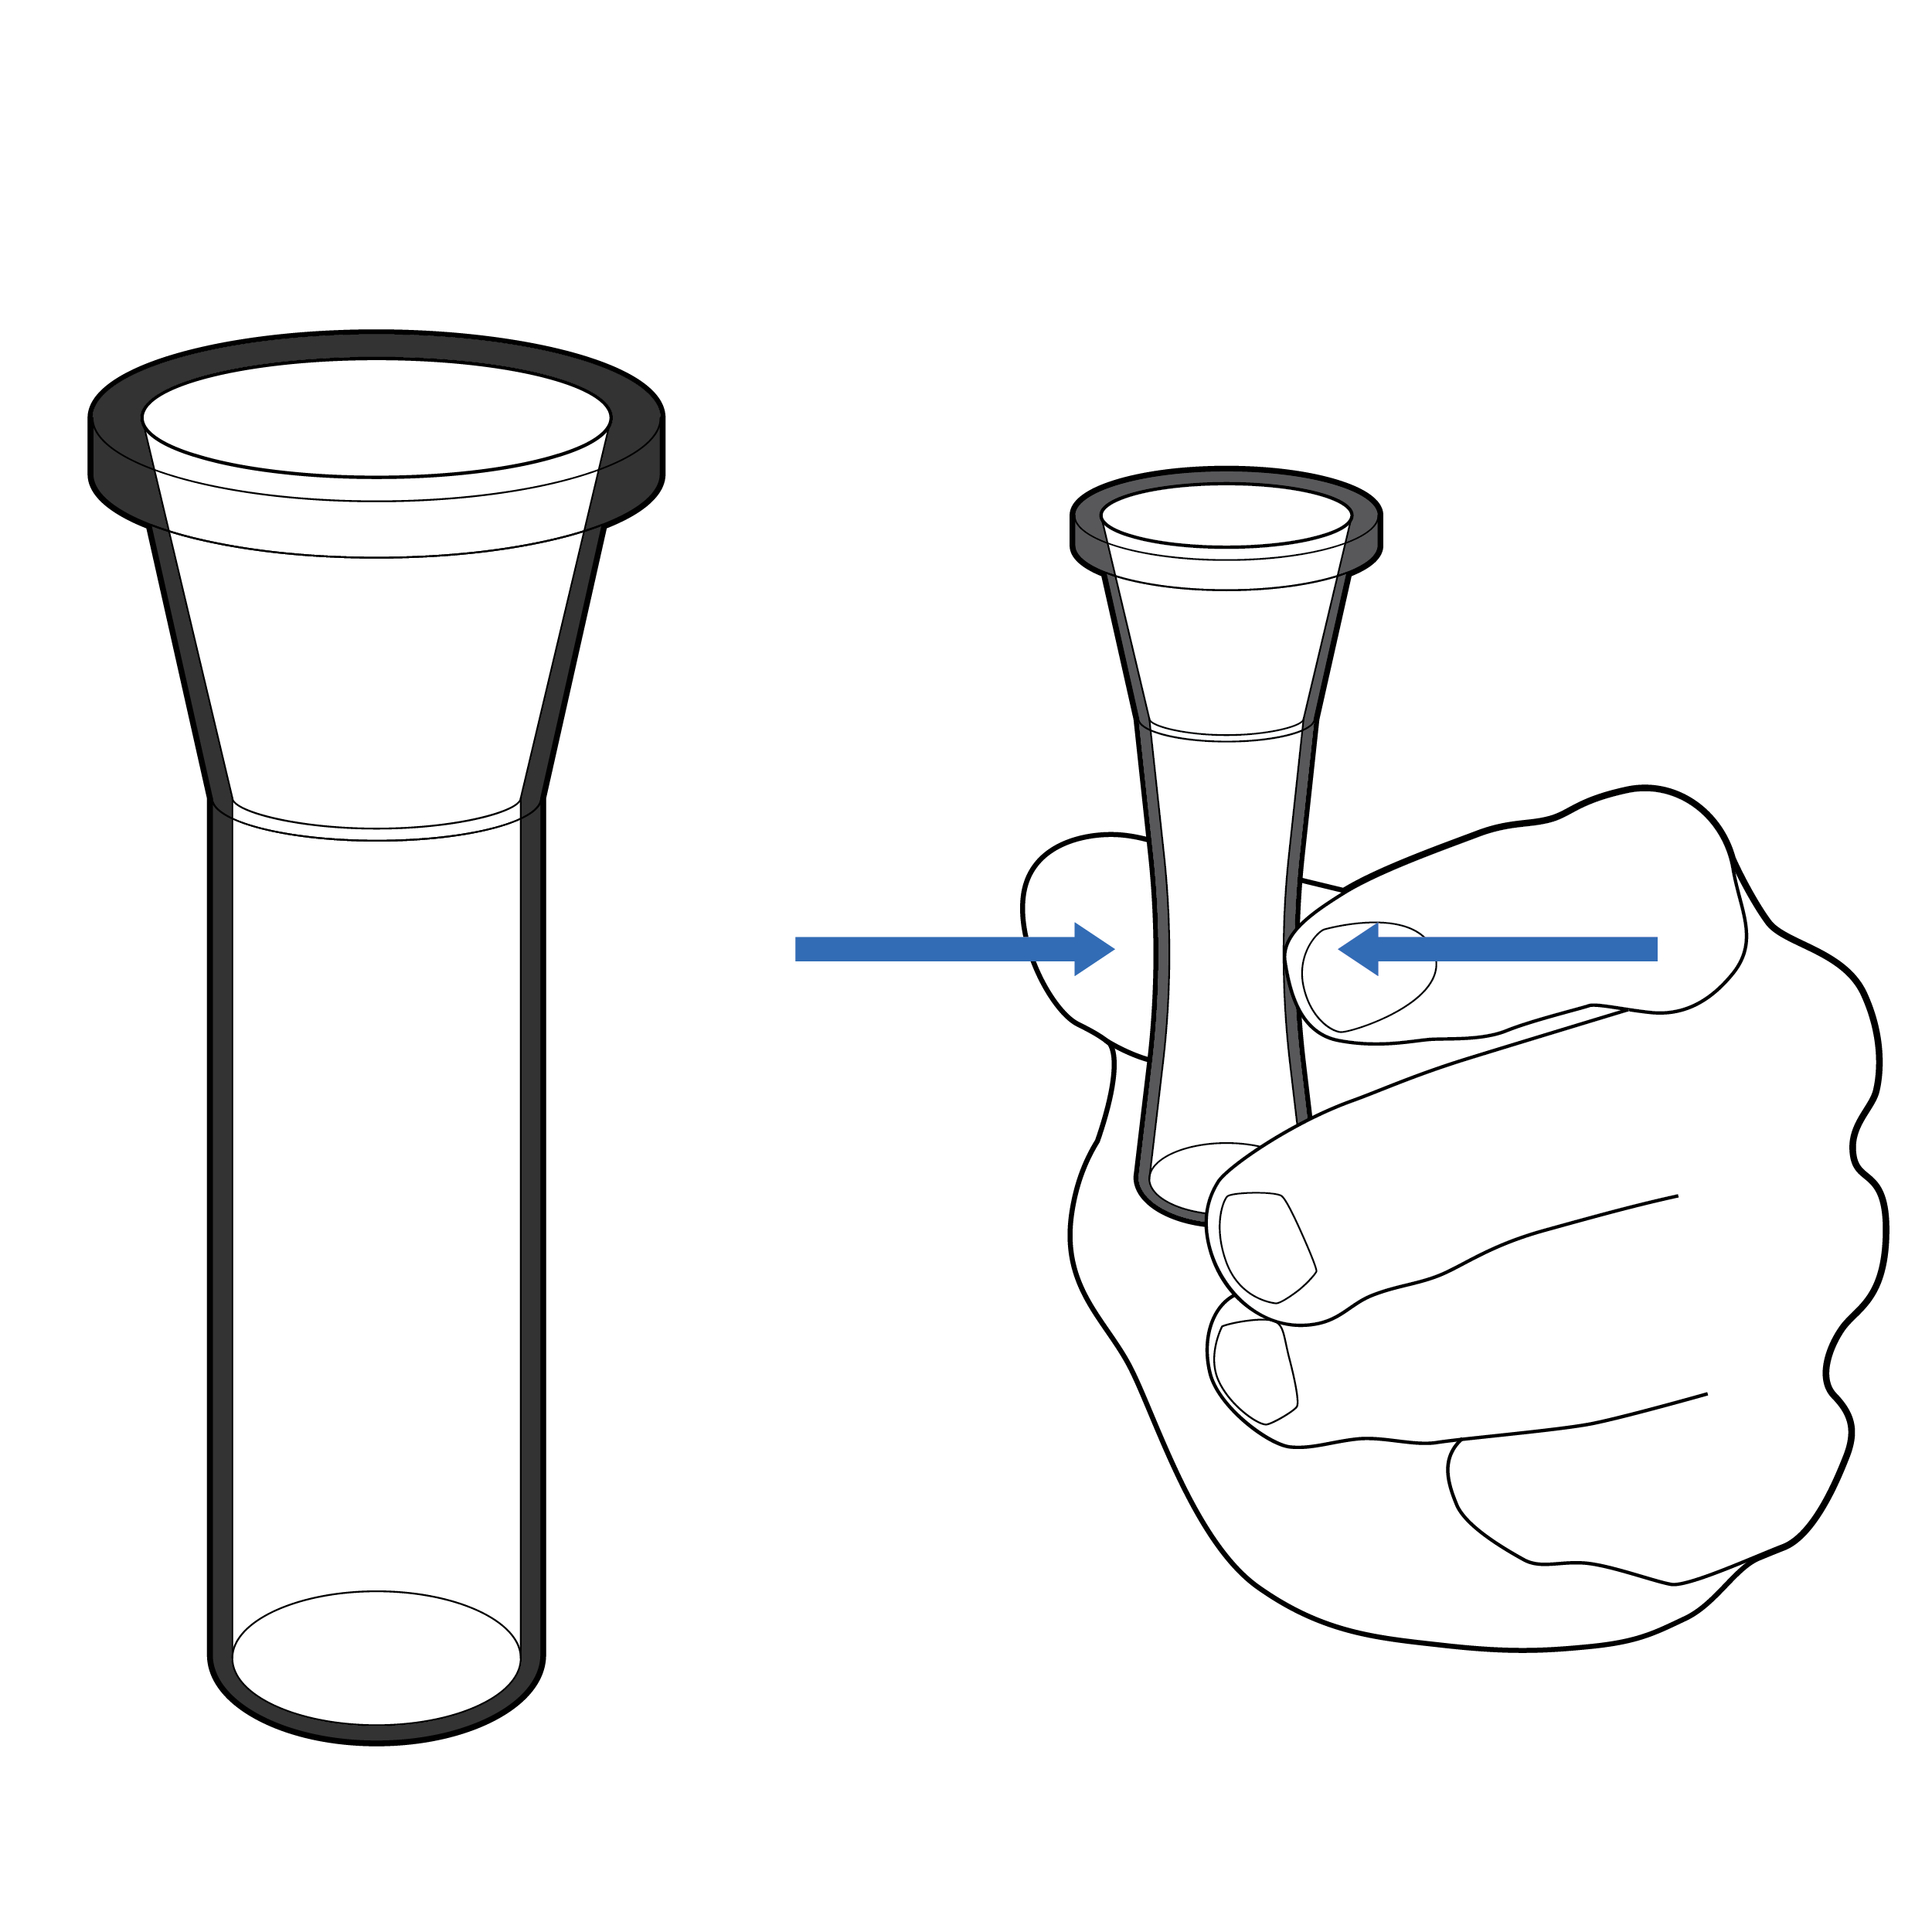 Cylindrical fluid vial with thin walls. A hand holding the vial at the center with a pinch grip has narrow overlaid arrows, indicating improved ease of squeezing the vial.